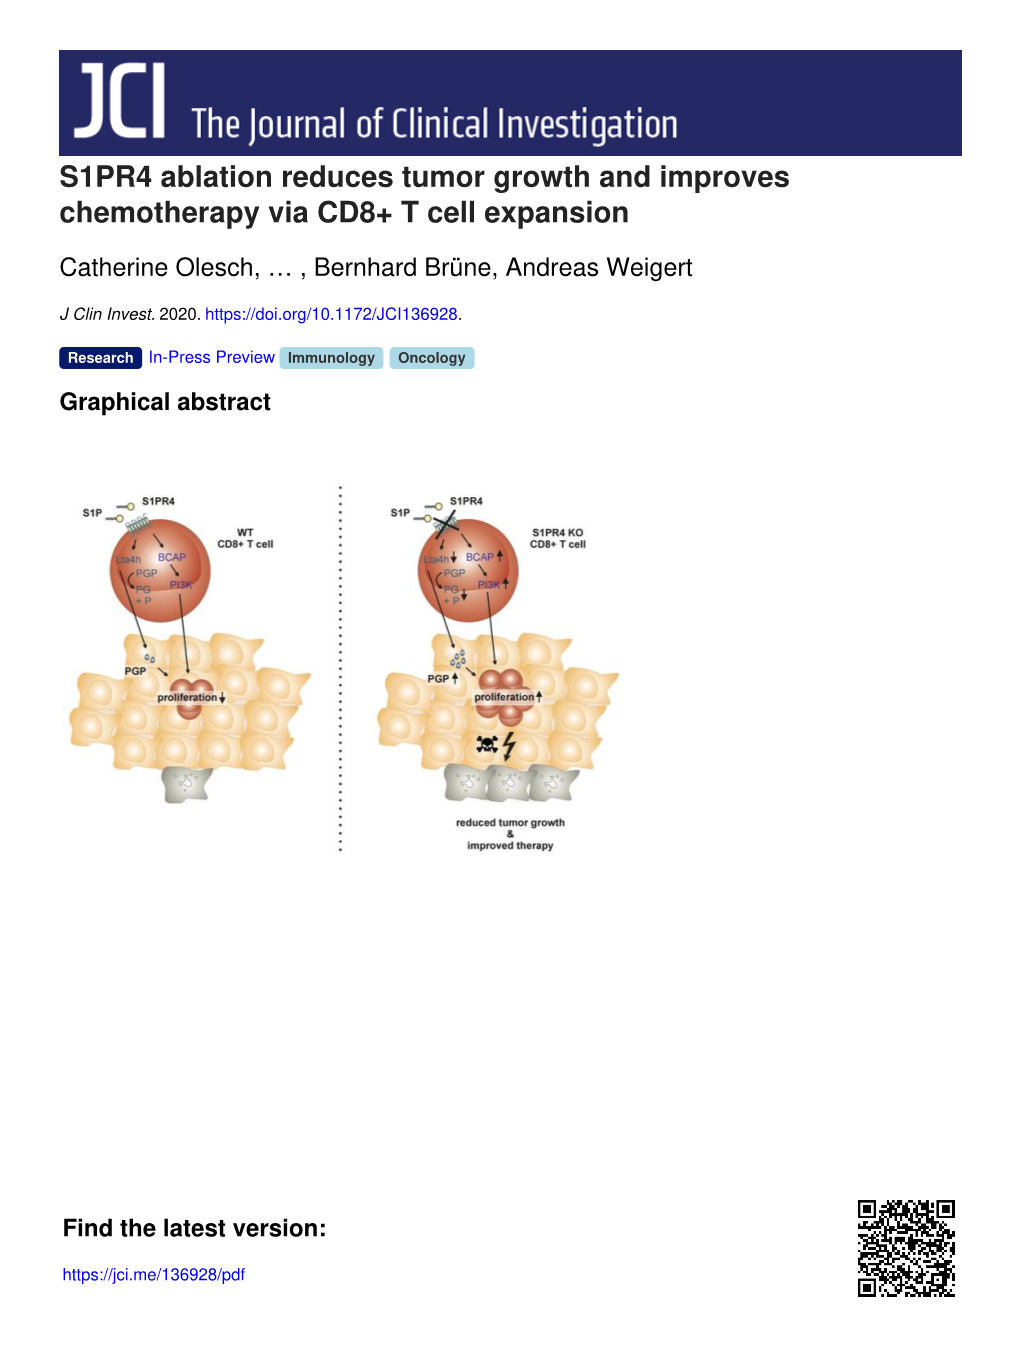 S1PR4 Ablation Reduces Tumor Growth and Improves Chemotherapy Via CD8+ T Cell Expansion